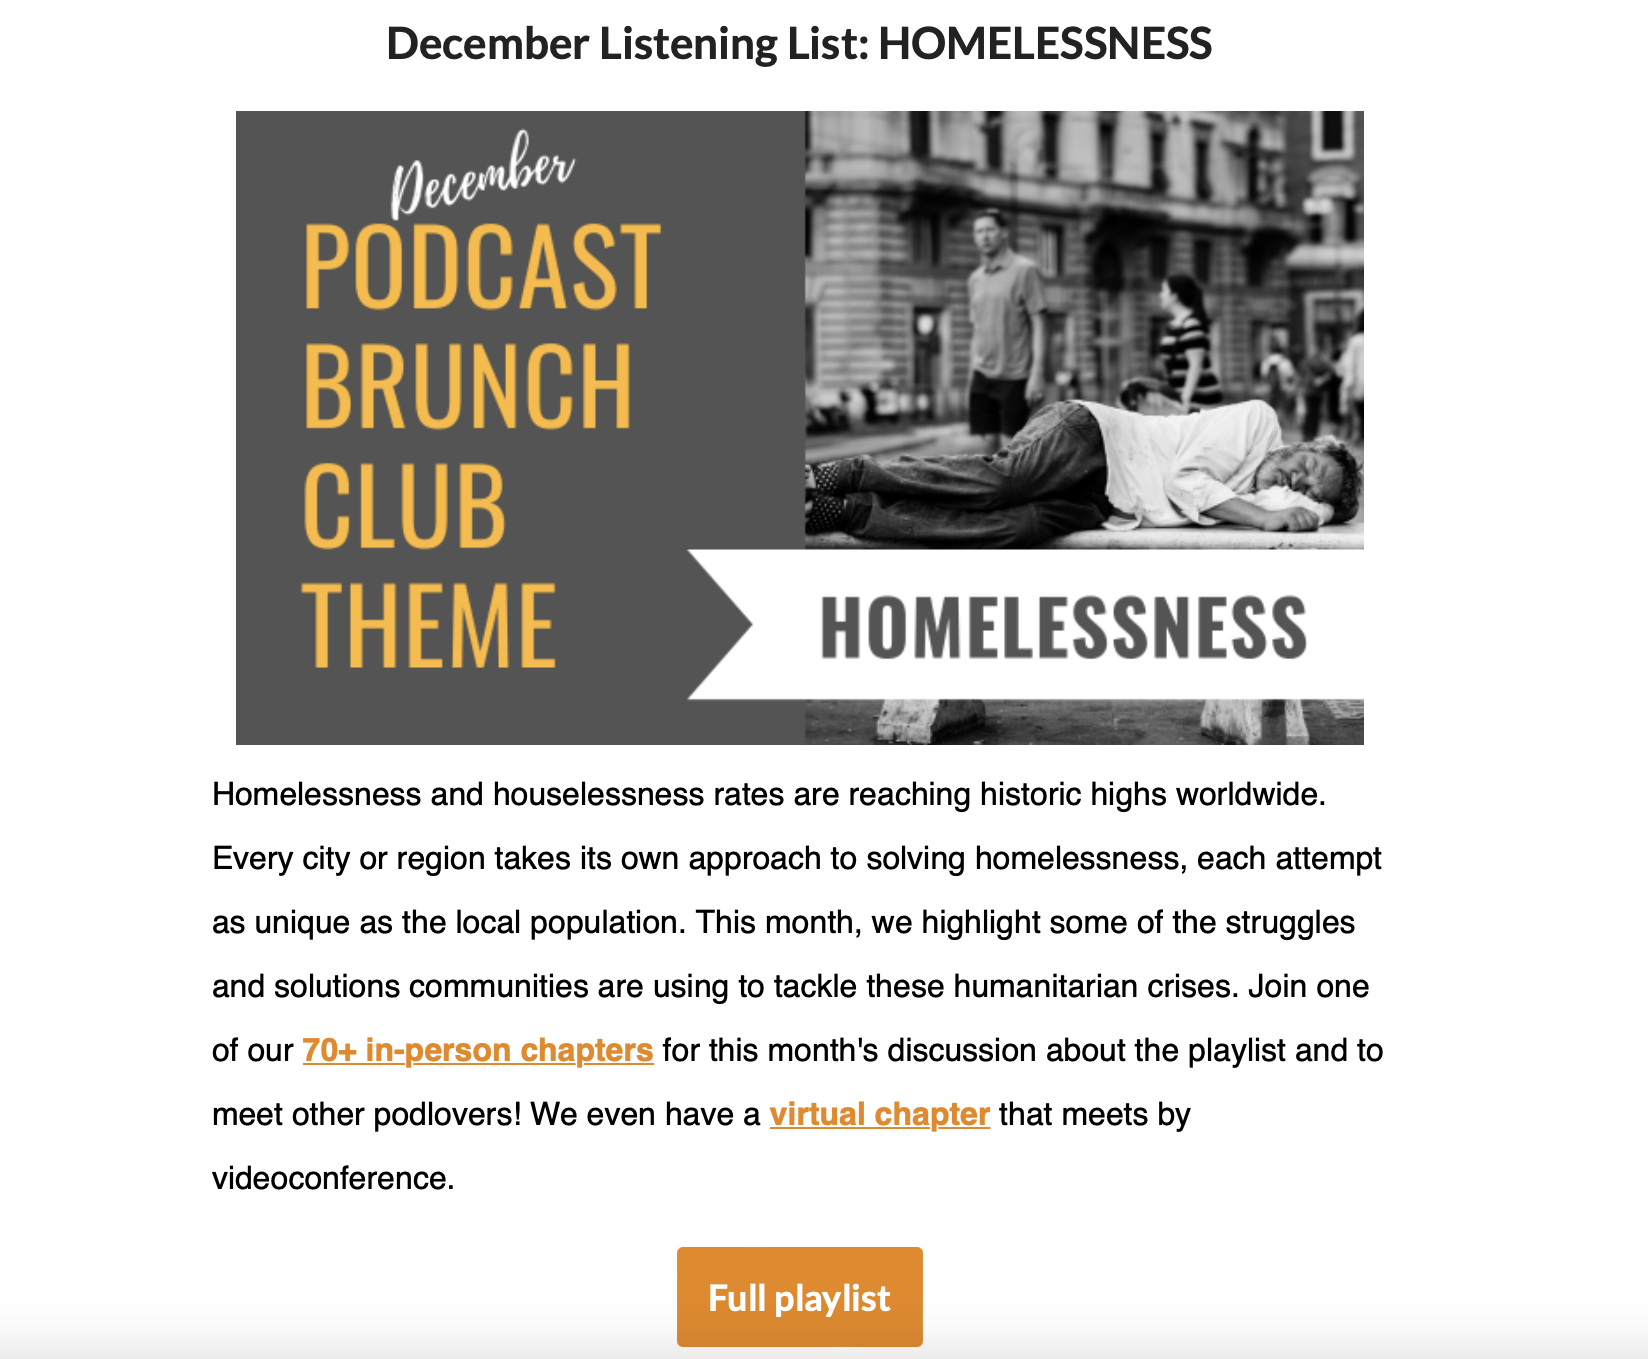 An example of a podcast newsletter